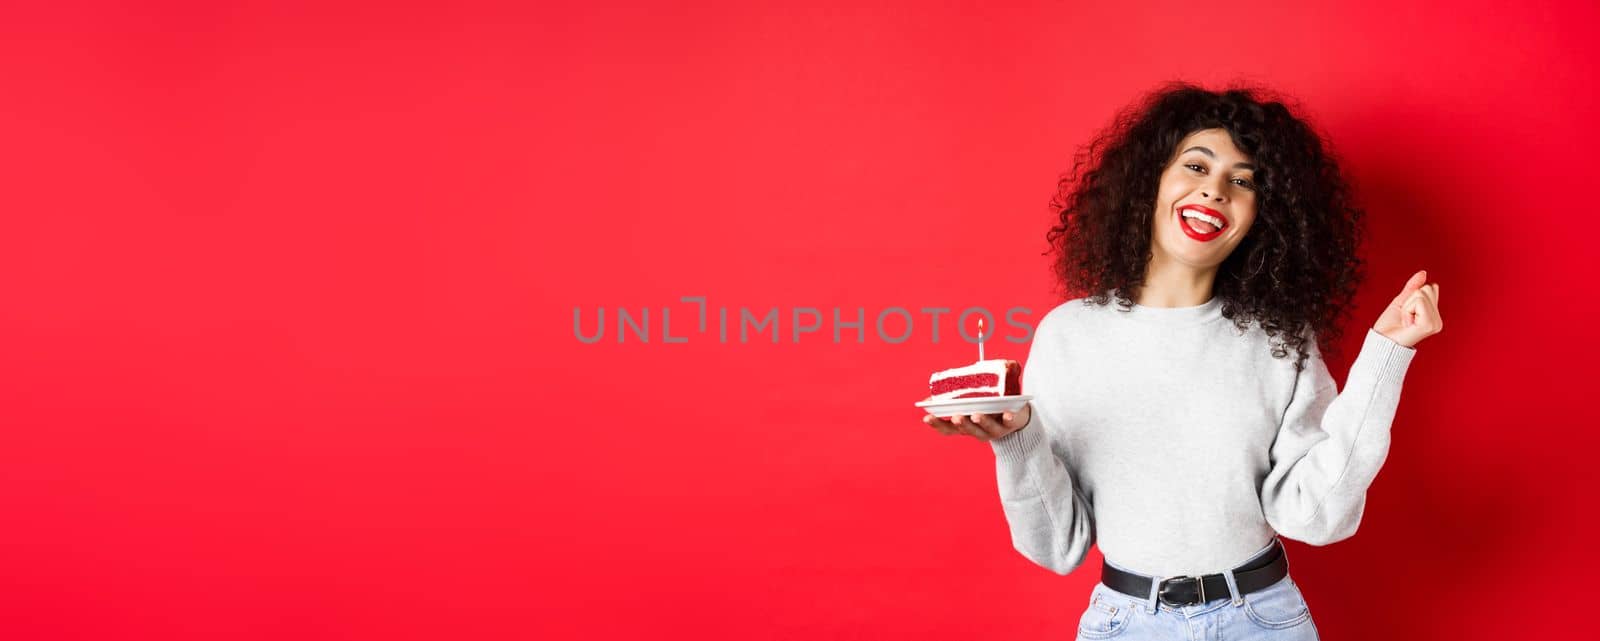 Celebration and holidays concept. Happy beautiful woman dancing and making birthday wish, holding b-day cake and smiling, standing on red background.